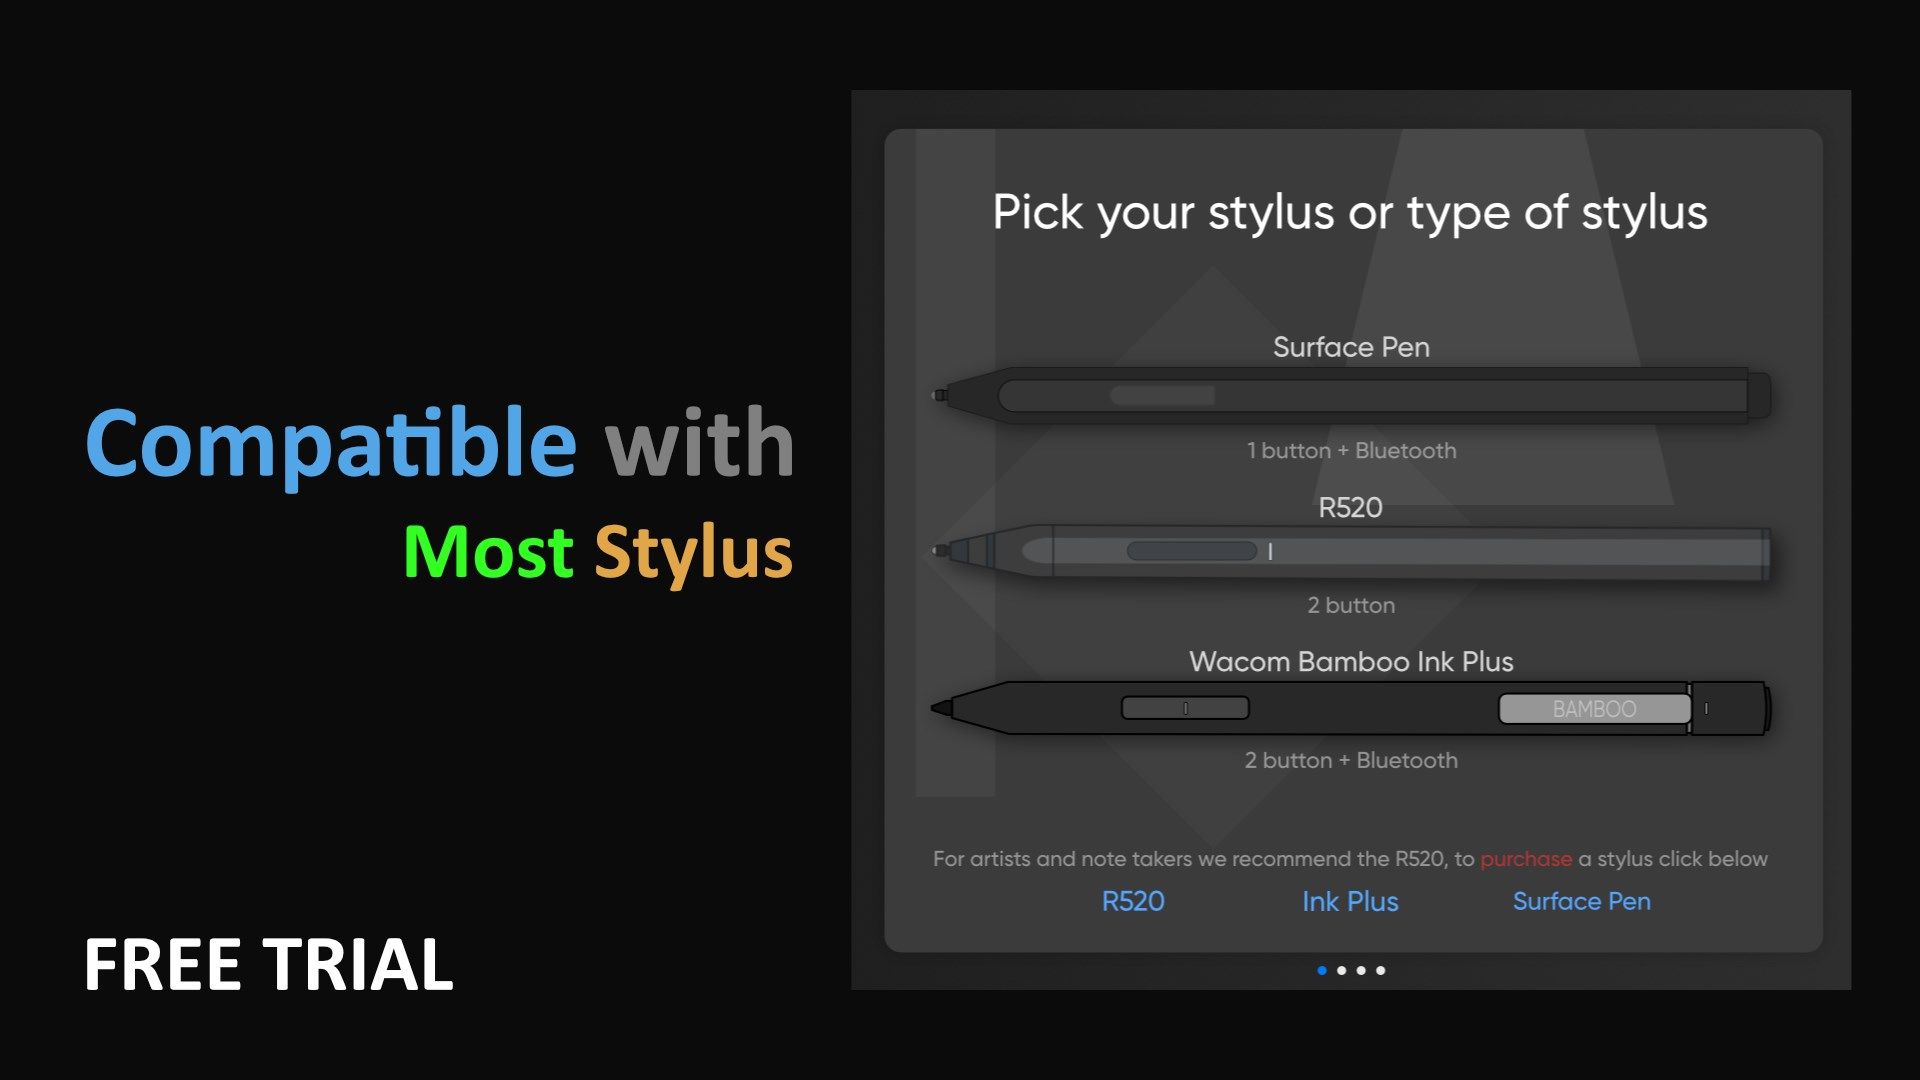 Compatible with most stylus used on Windows devices - Free Trial!